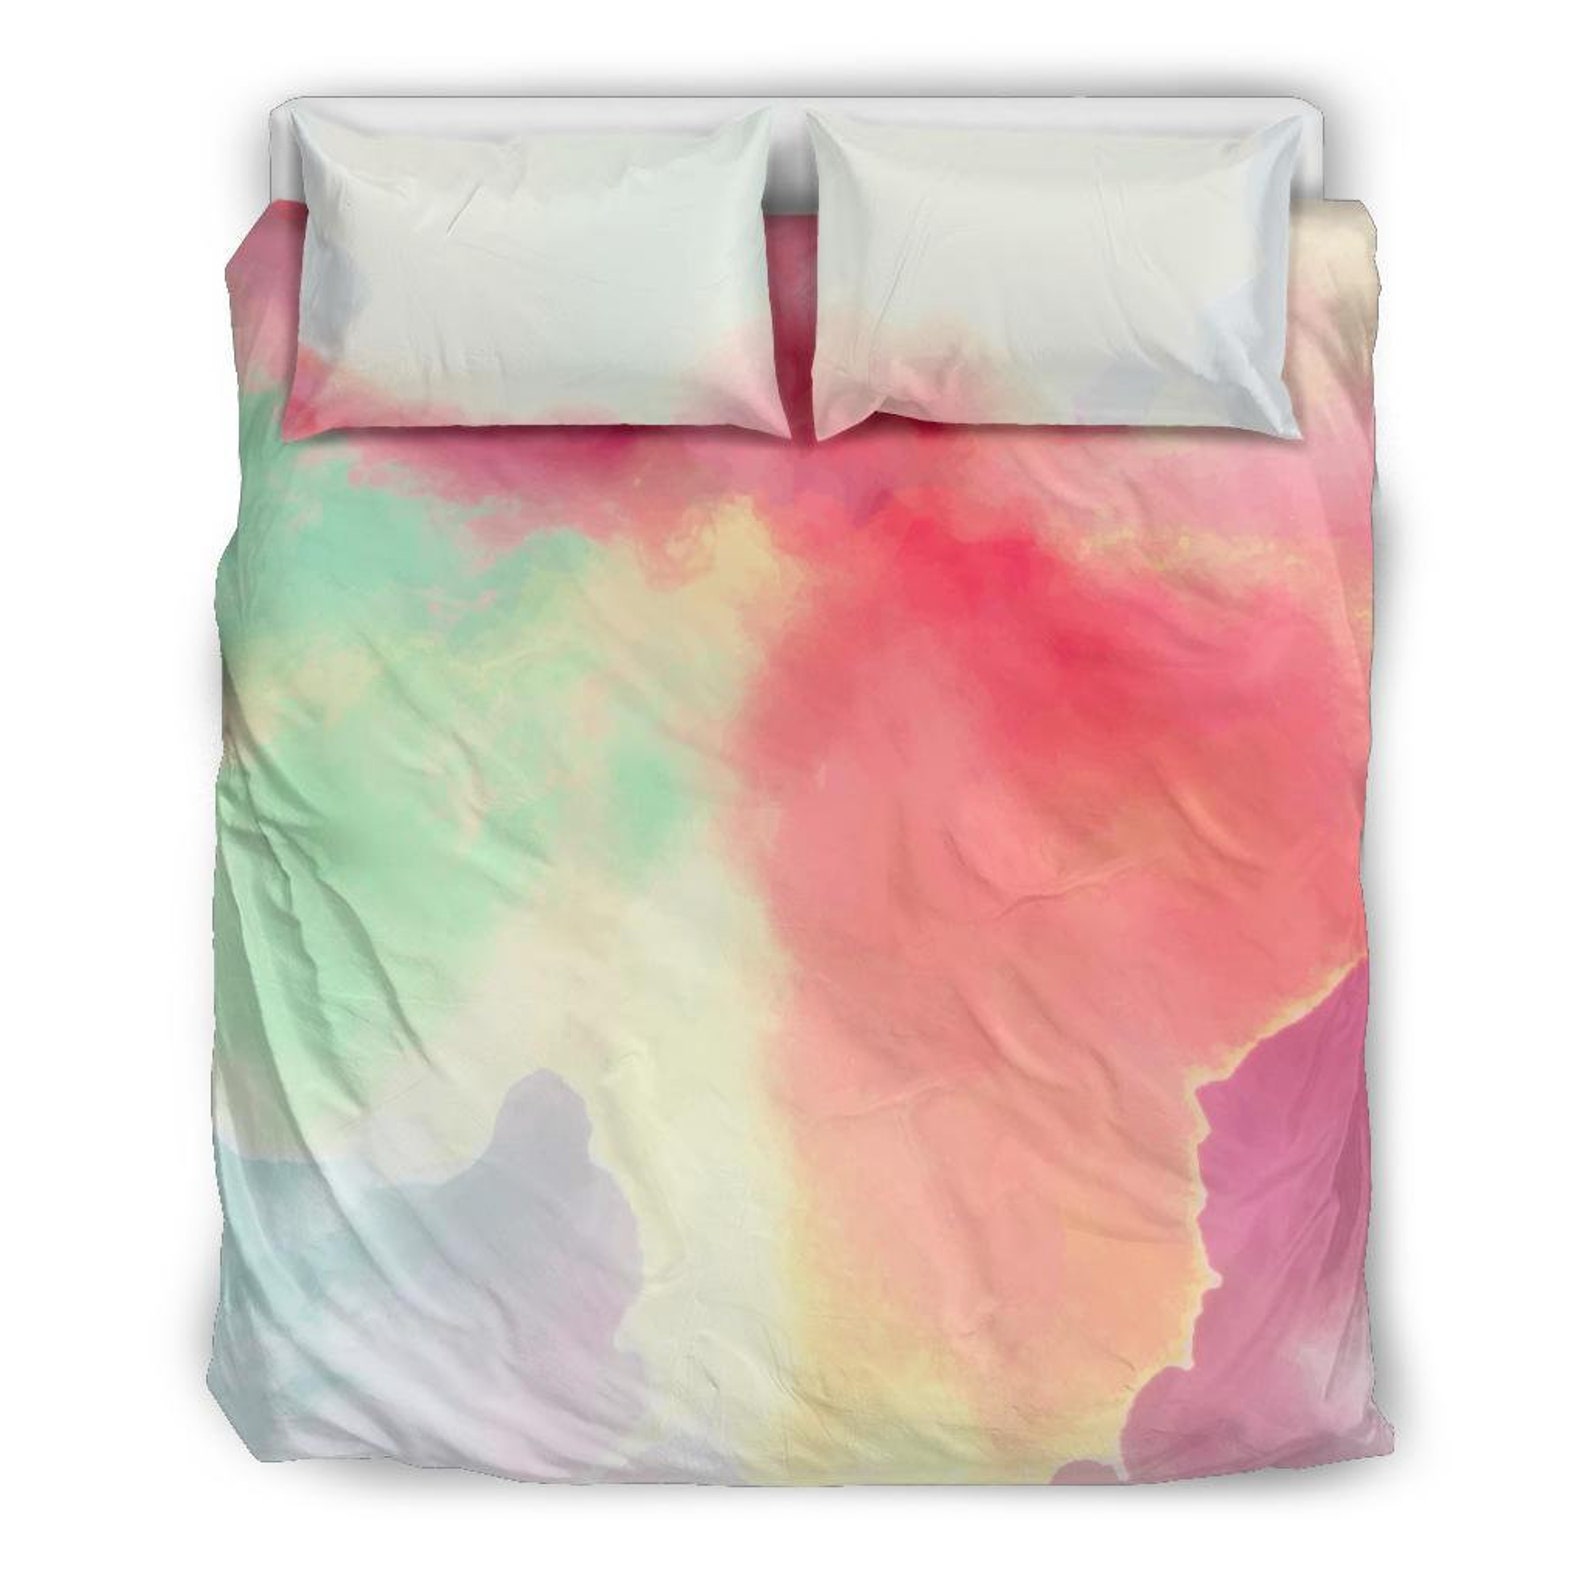 Colorful Custom Tie dye bedding set with pretty pastel colors | Etsy